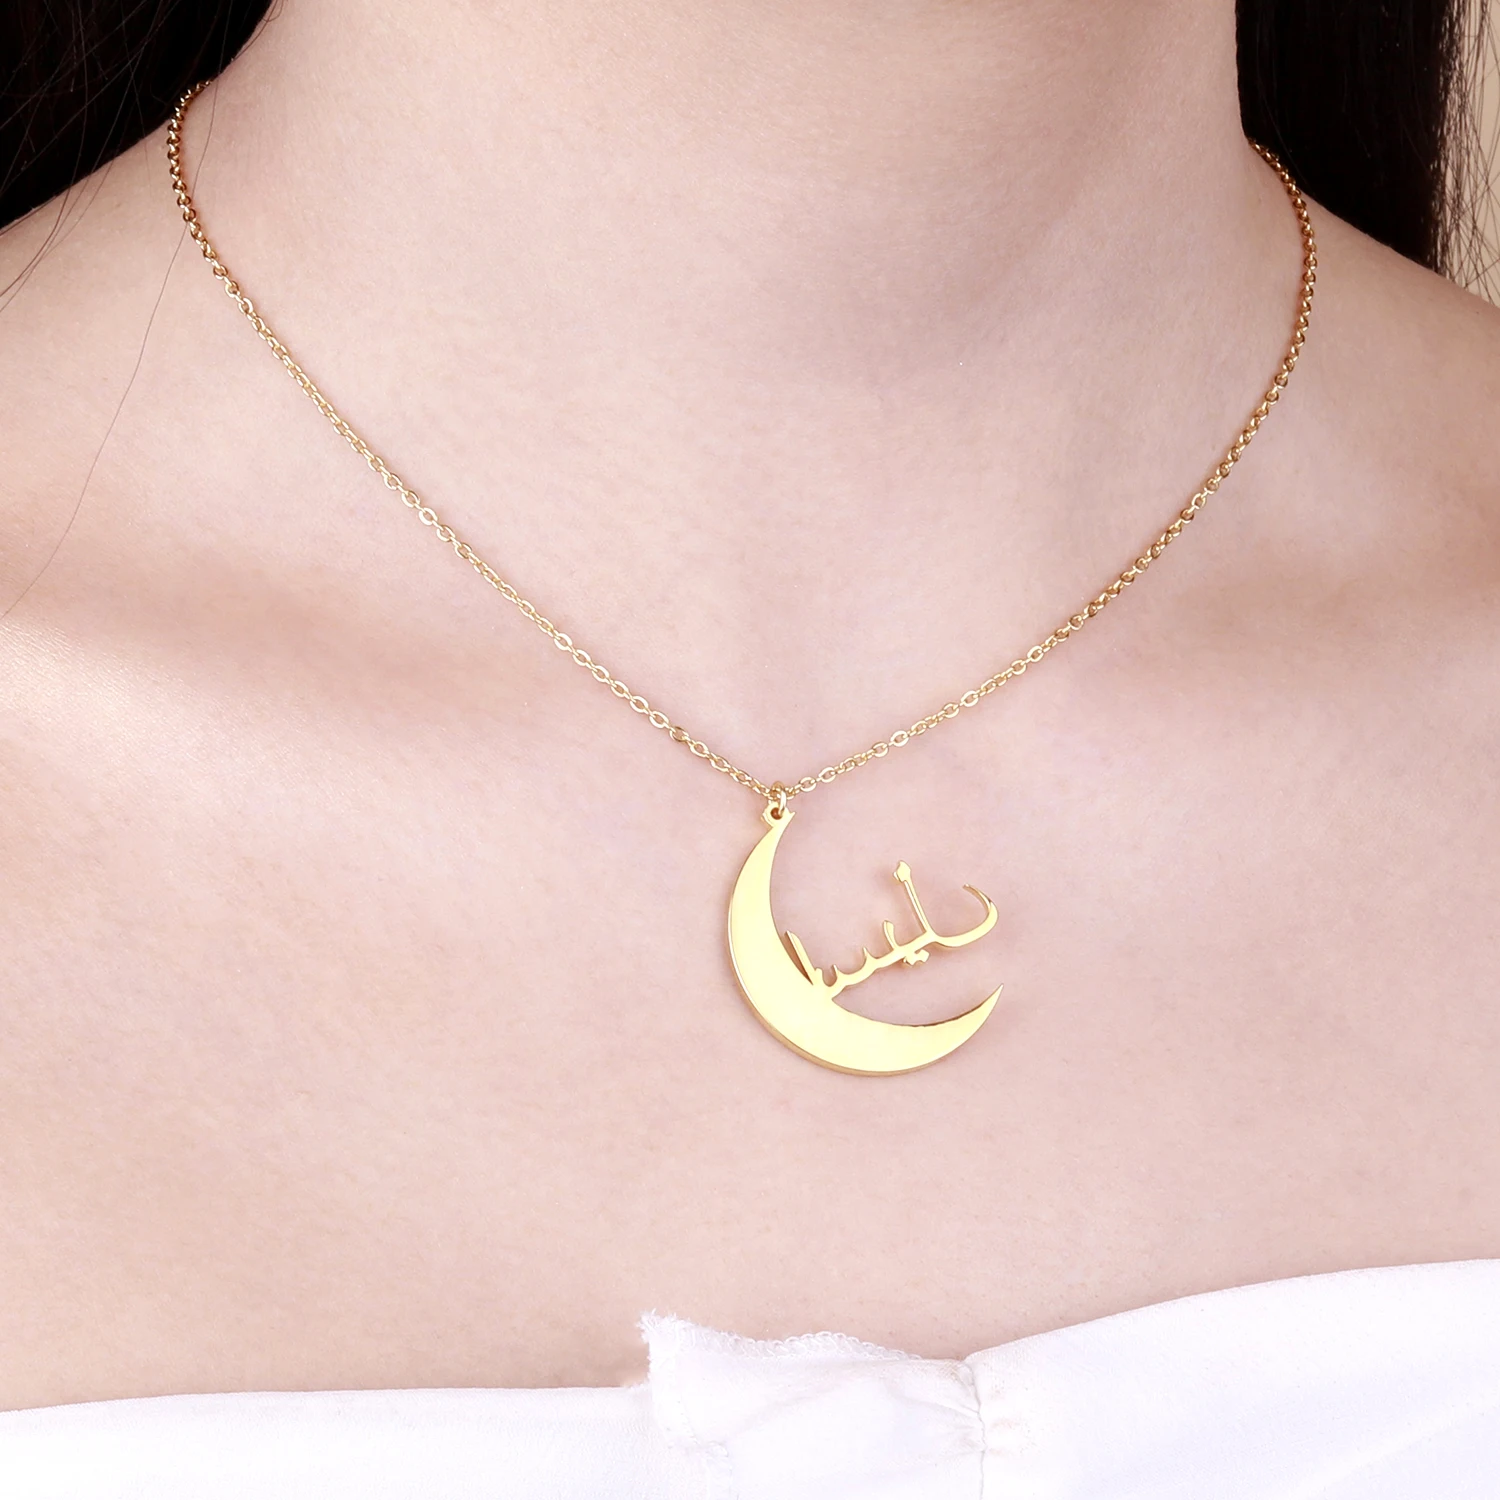 Custom Moon Arabic Name Necklace For Women Jewelry  Creative Stainless Steel Moon Star Name Necklace Pendant Choker Jewelry BFF